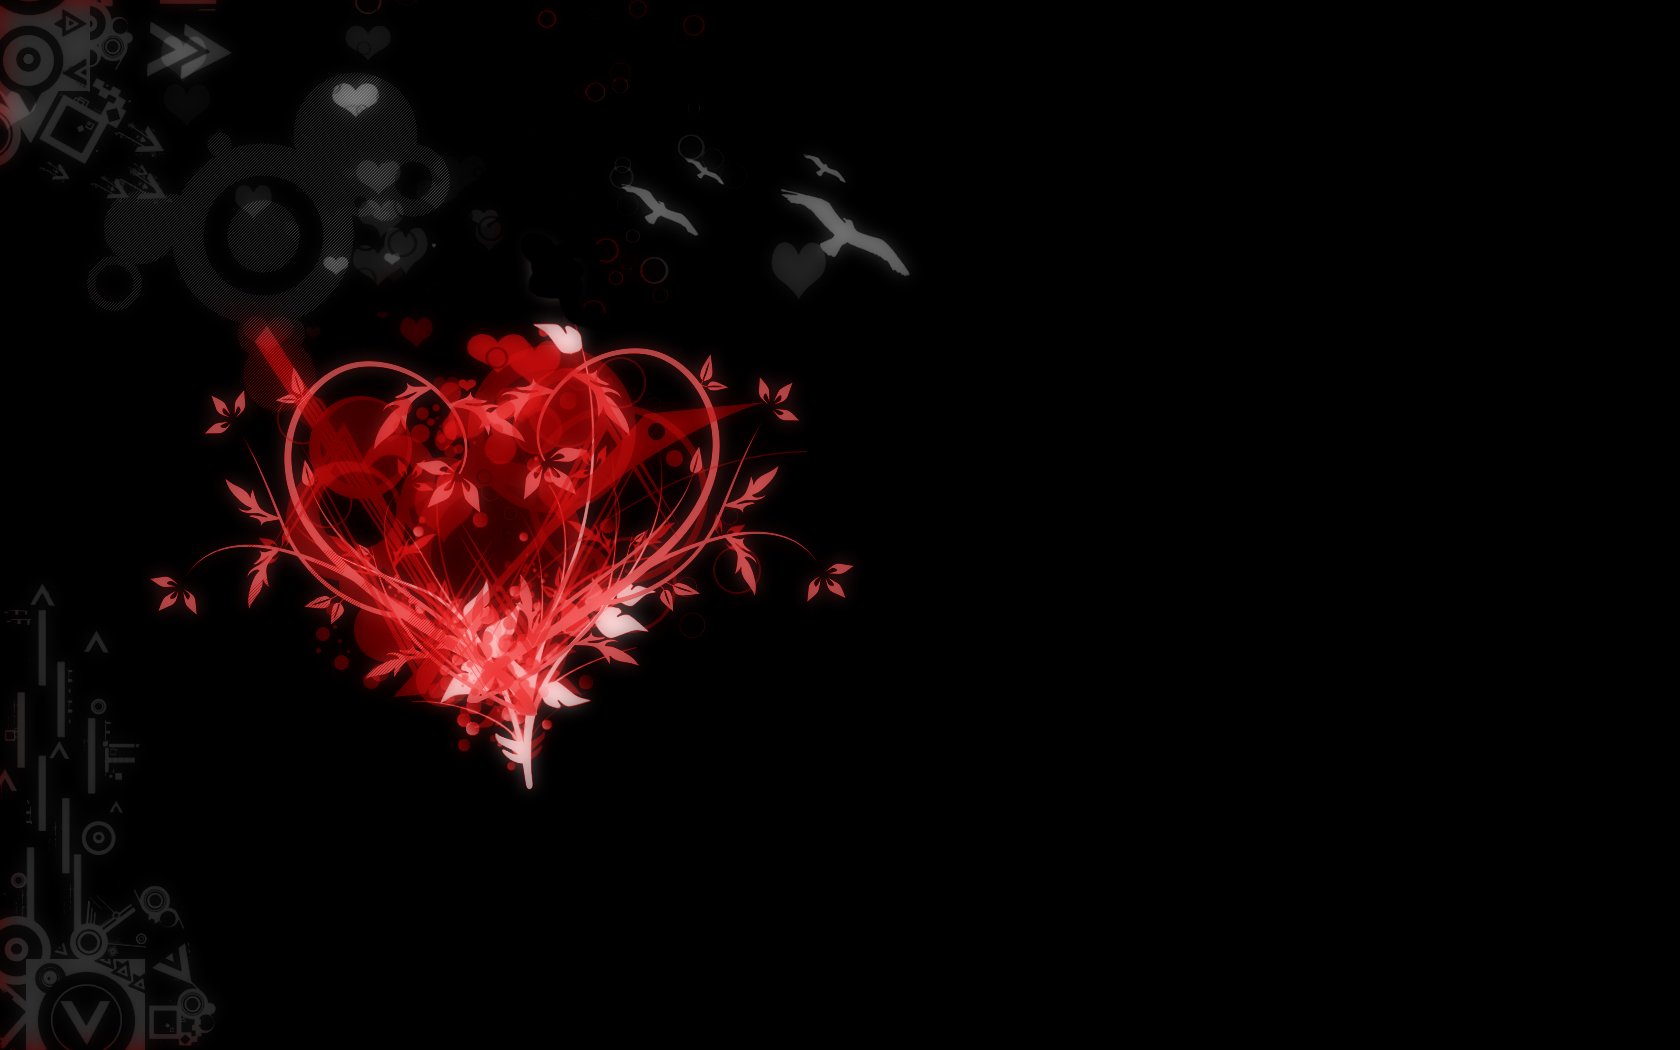 2504284 Red Heart Background Images Stock Photos  Vectors  Shutterstock